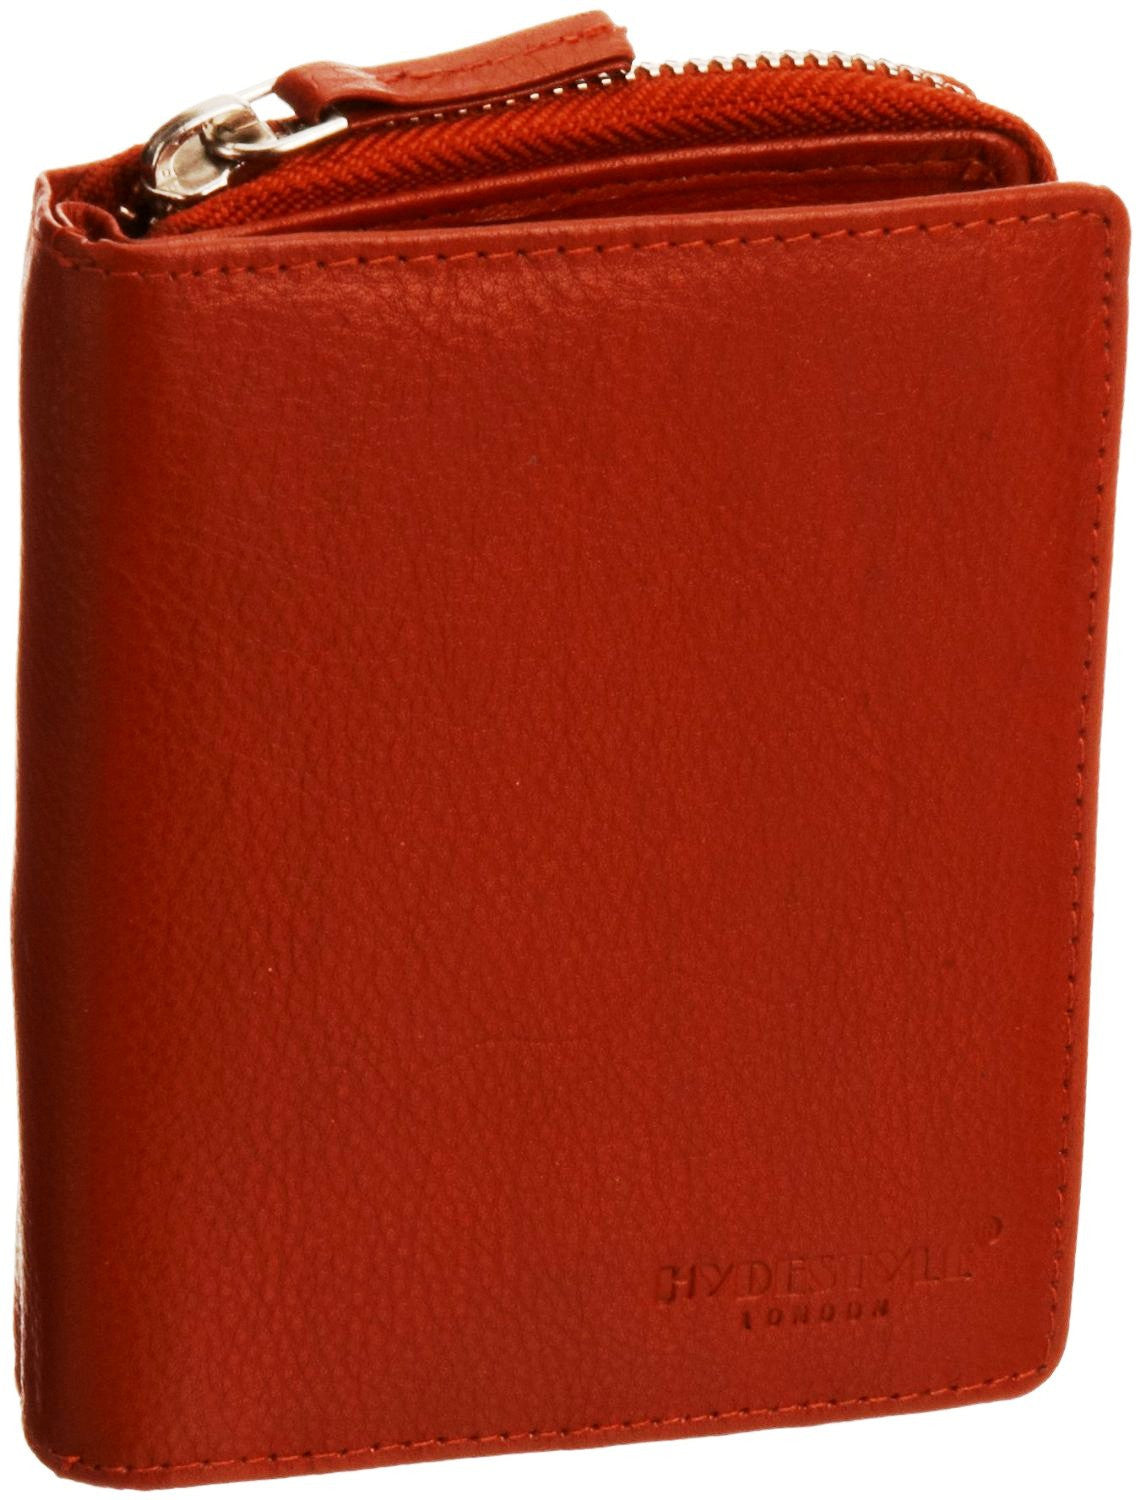 PERSONALIZED Leather Men's Wallet/ Bifold Wallet/ Red -  Israel